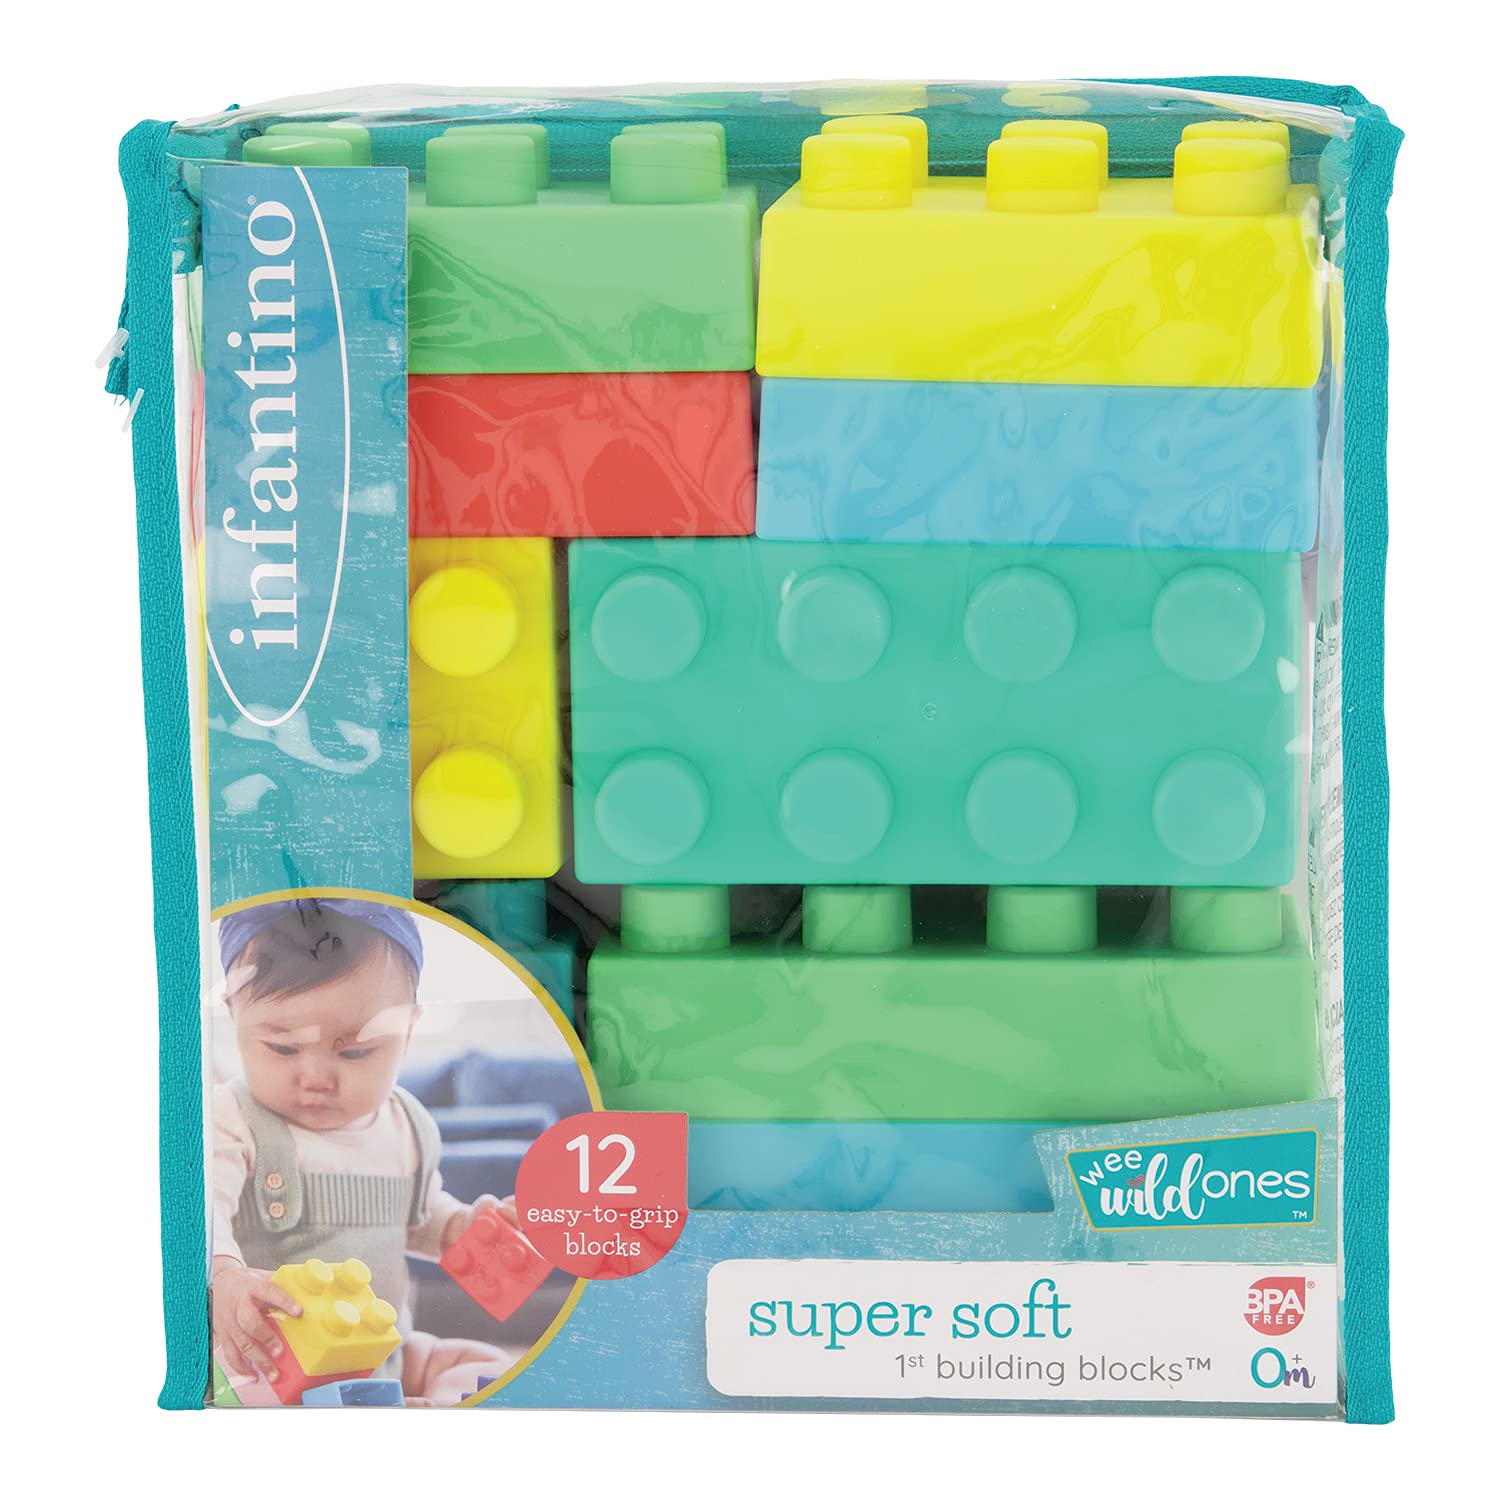 Infantino Super Soft Building Blocks, Easy-to-Hold for Babies & Toddlers, BPA-Free, Multi-Colored, 12-Piece Set